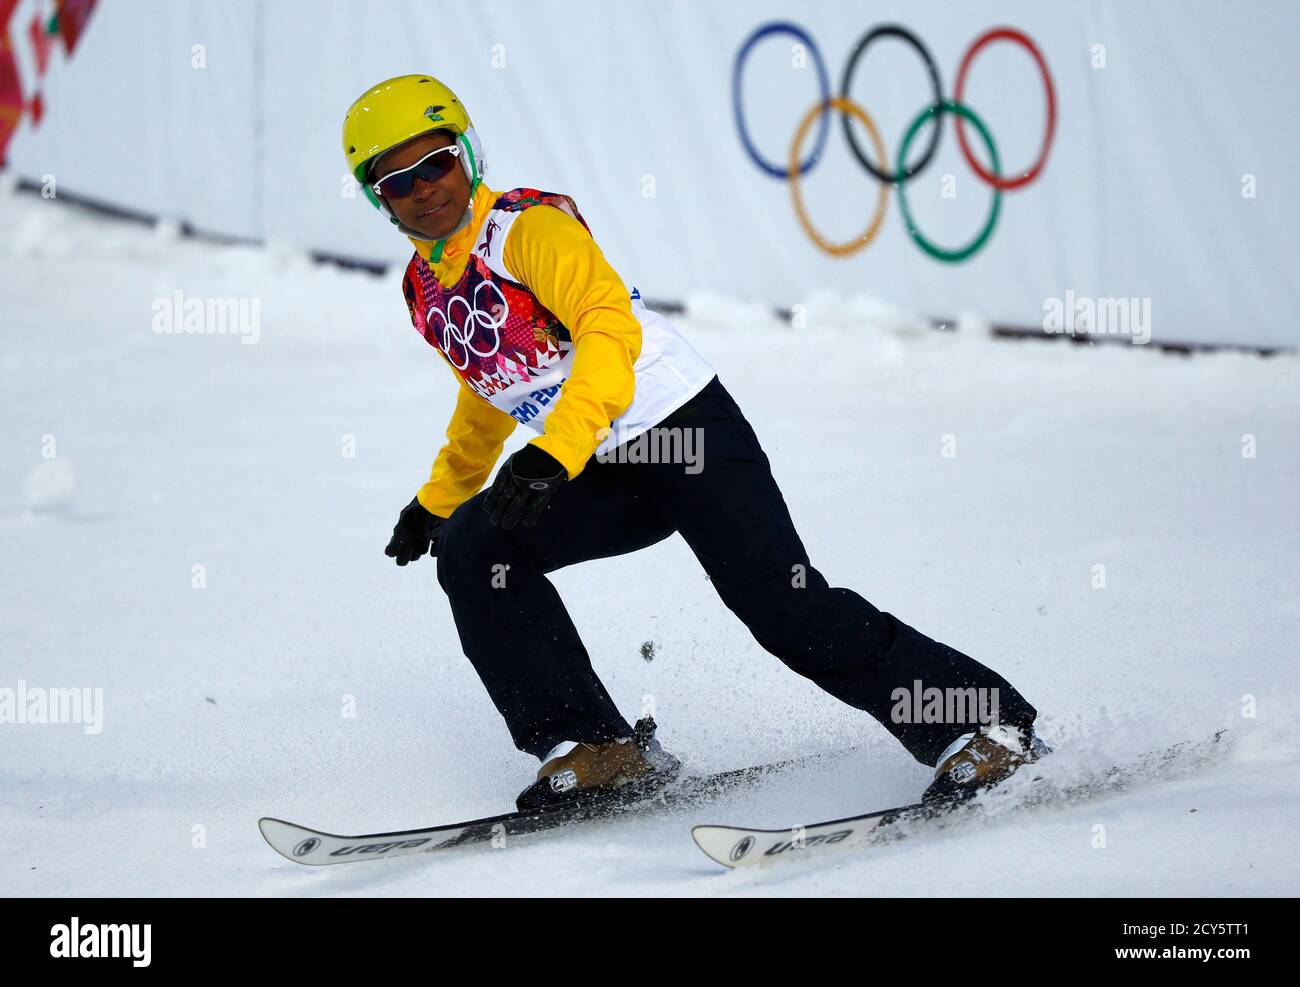 Brazil's Joselane Santos reacts during the women's freestyle skiing aerials qualification round at the 2014 Sochi Winter Olympic Games in Rosa Khutor February 14, 2014. Santos was the only woman in aerials qualifying to take off from the smallest of the six ramps, perform the simplest jump, finish last and promptly burst into tears. Considering the Brazilian former gymnast had strapped on skis for the first time only seven months ago, though, she could rightly consider executing two clean jumps on the Extreme Park hill an Olympic triumph.  REUTERS/Mike Blake (RUSSIA  - Tags: SPORT OLYMPICS SPO Stock Photo